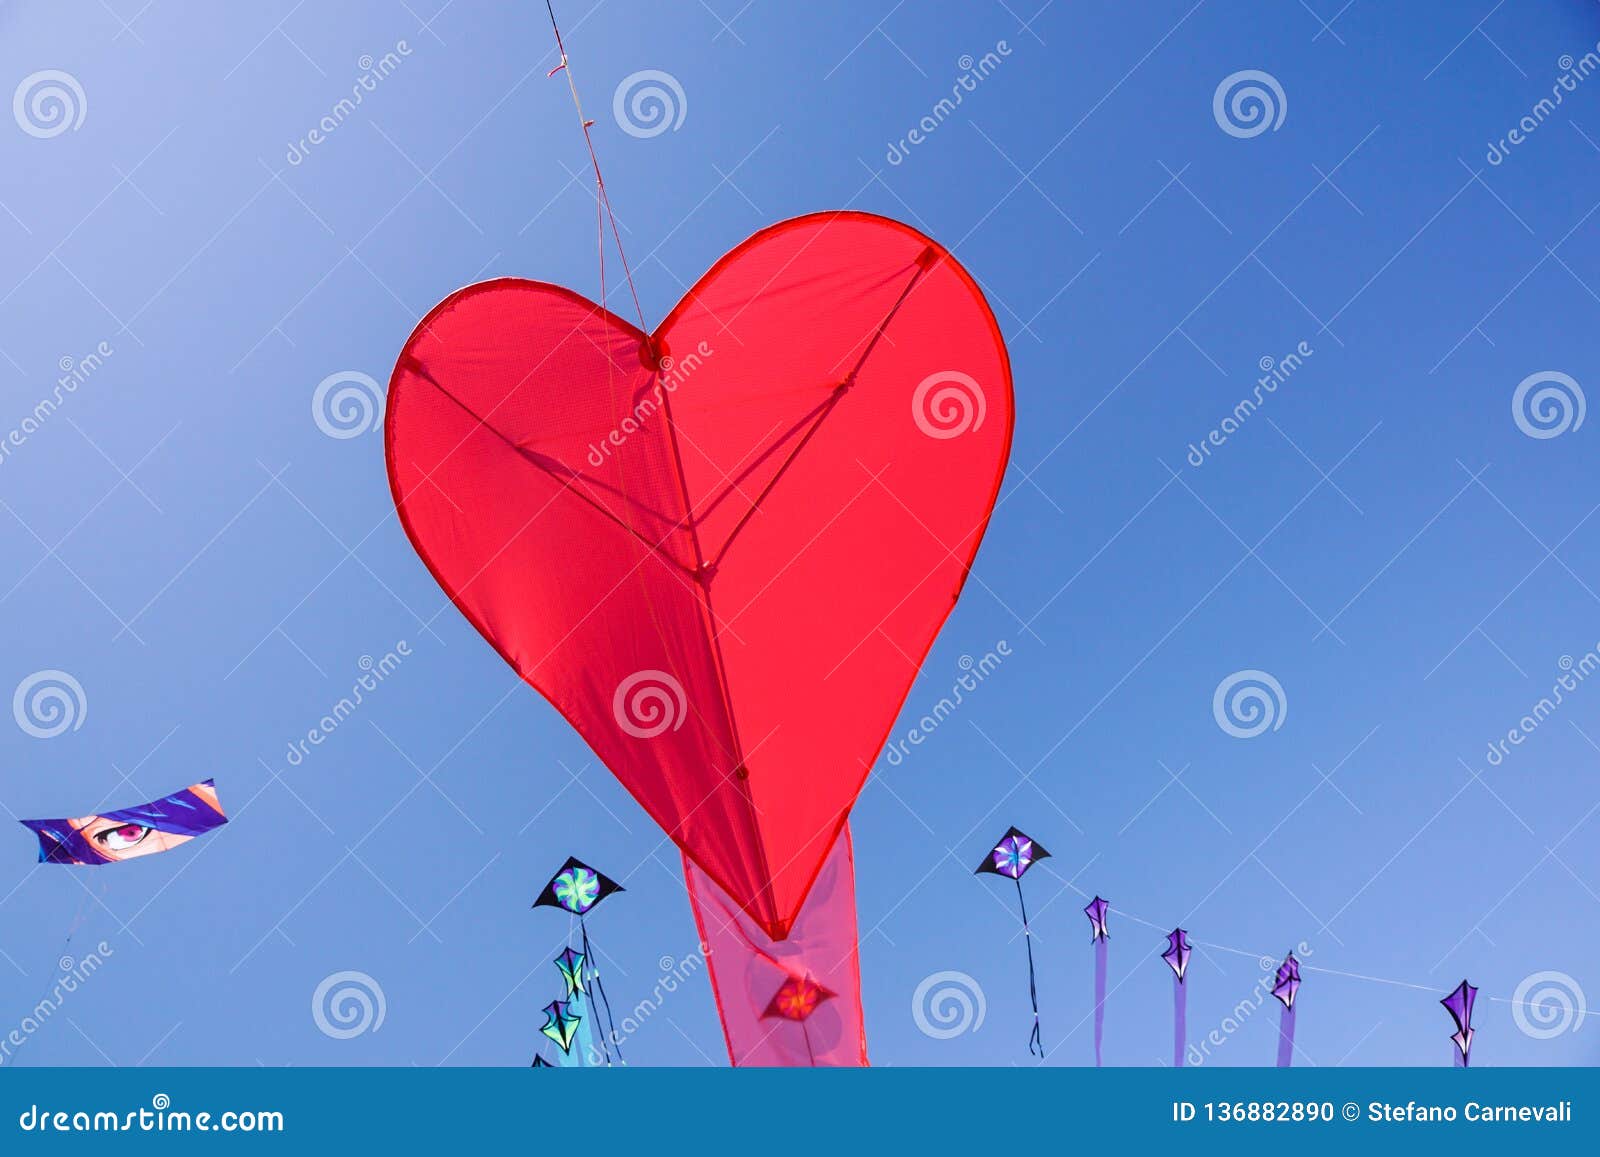 Details about   2020 Soft Kite Little Red Heart Love Couple Thread Without Skeleton Kite 